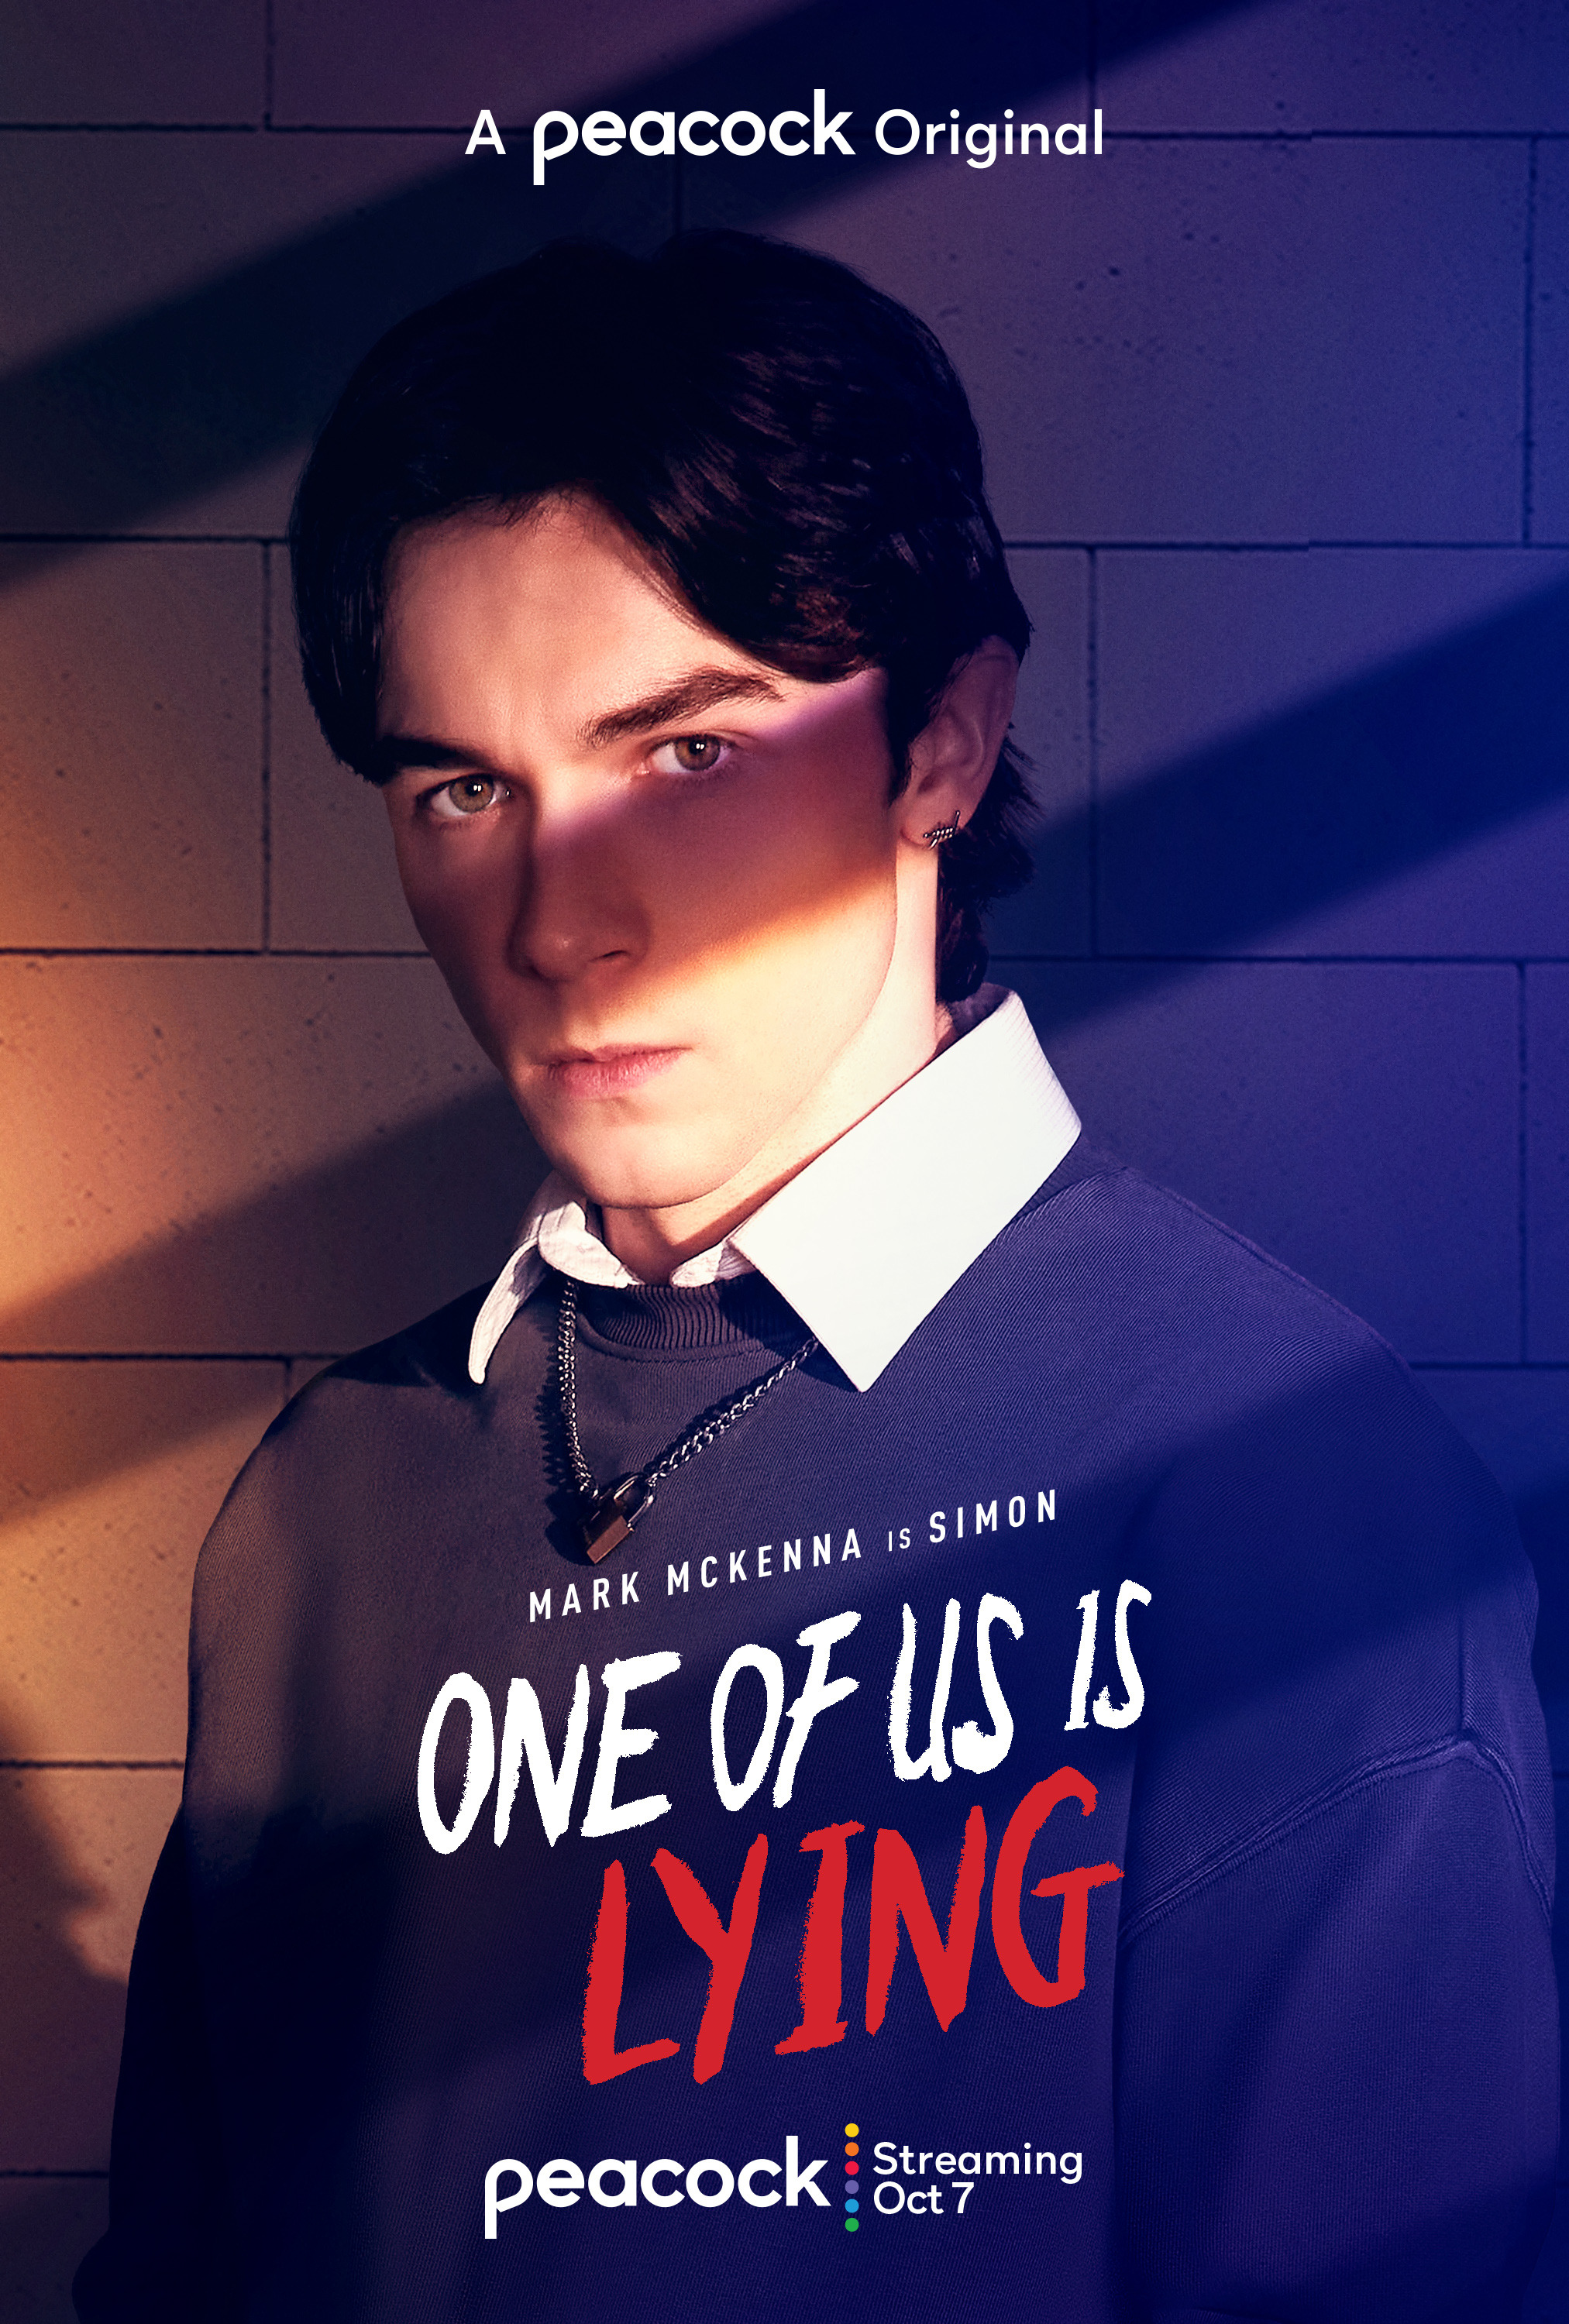 One of us is lying movie